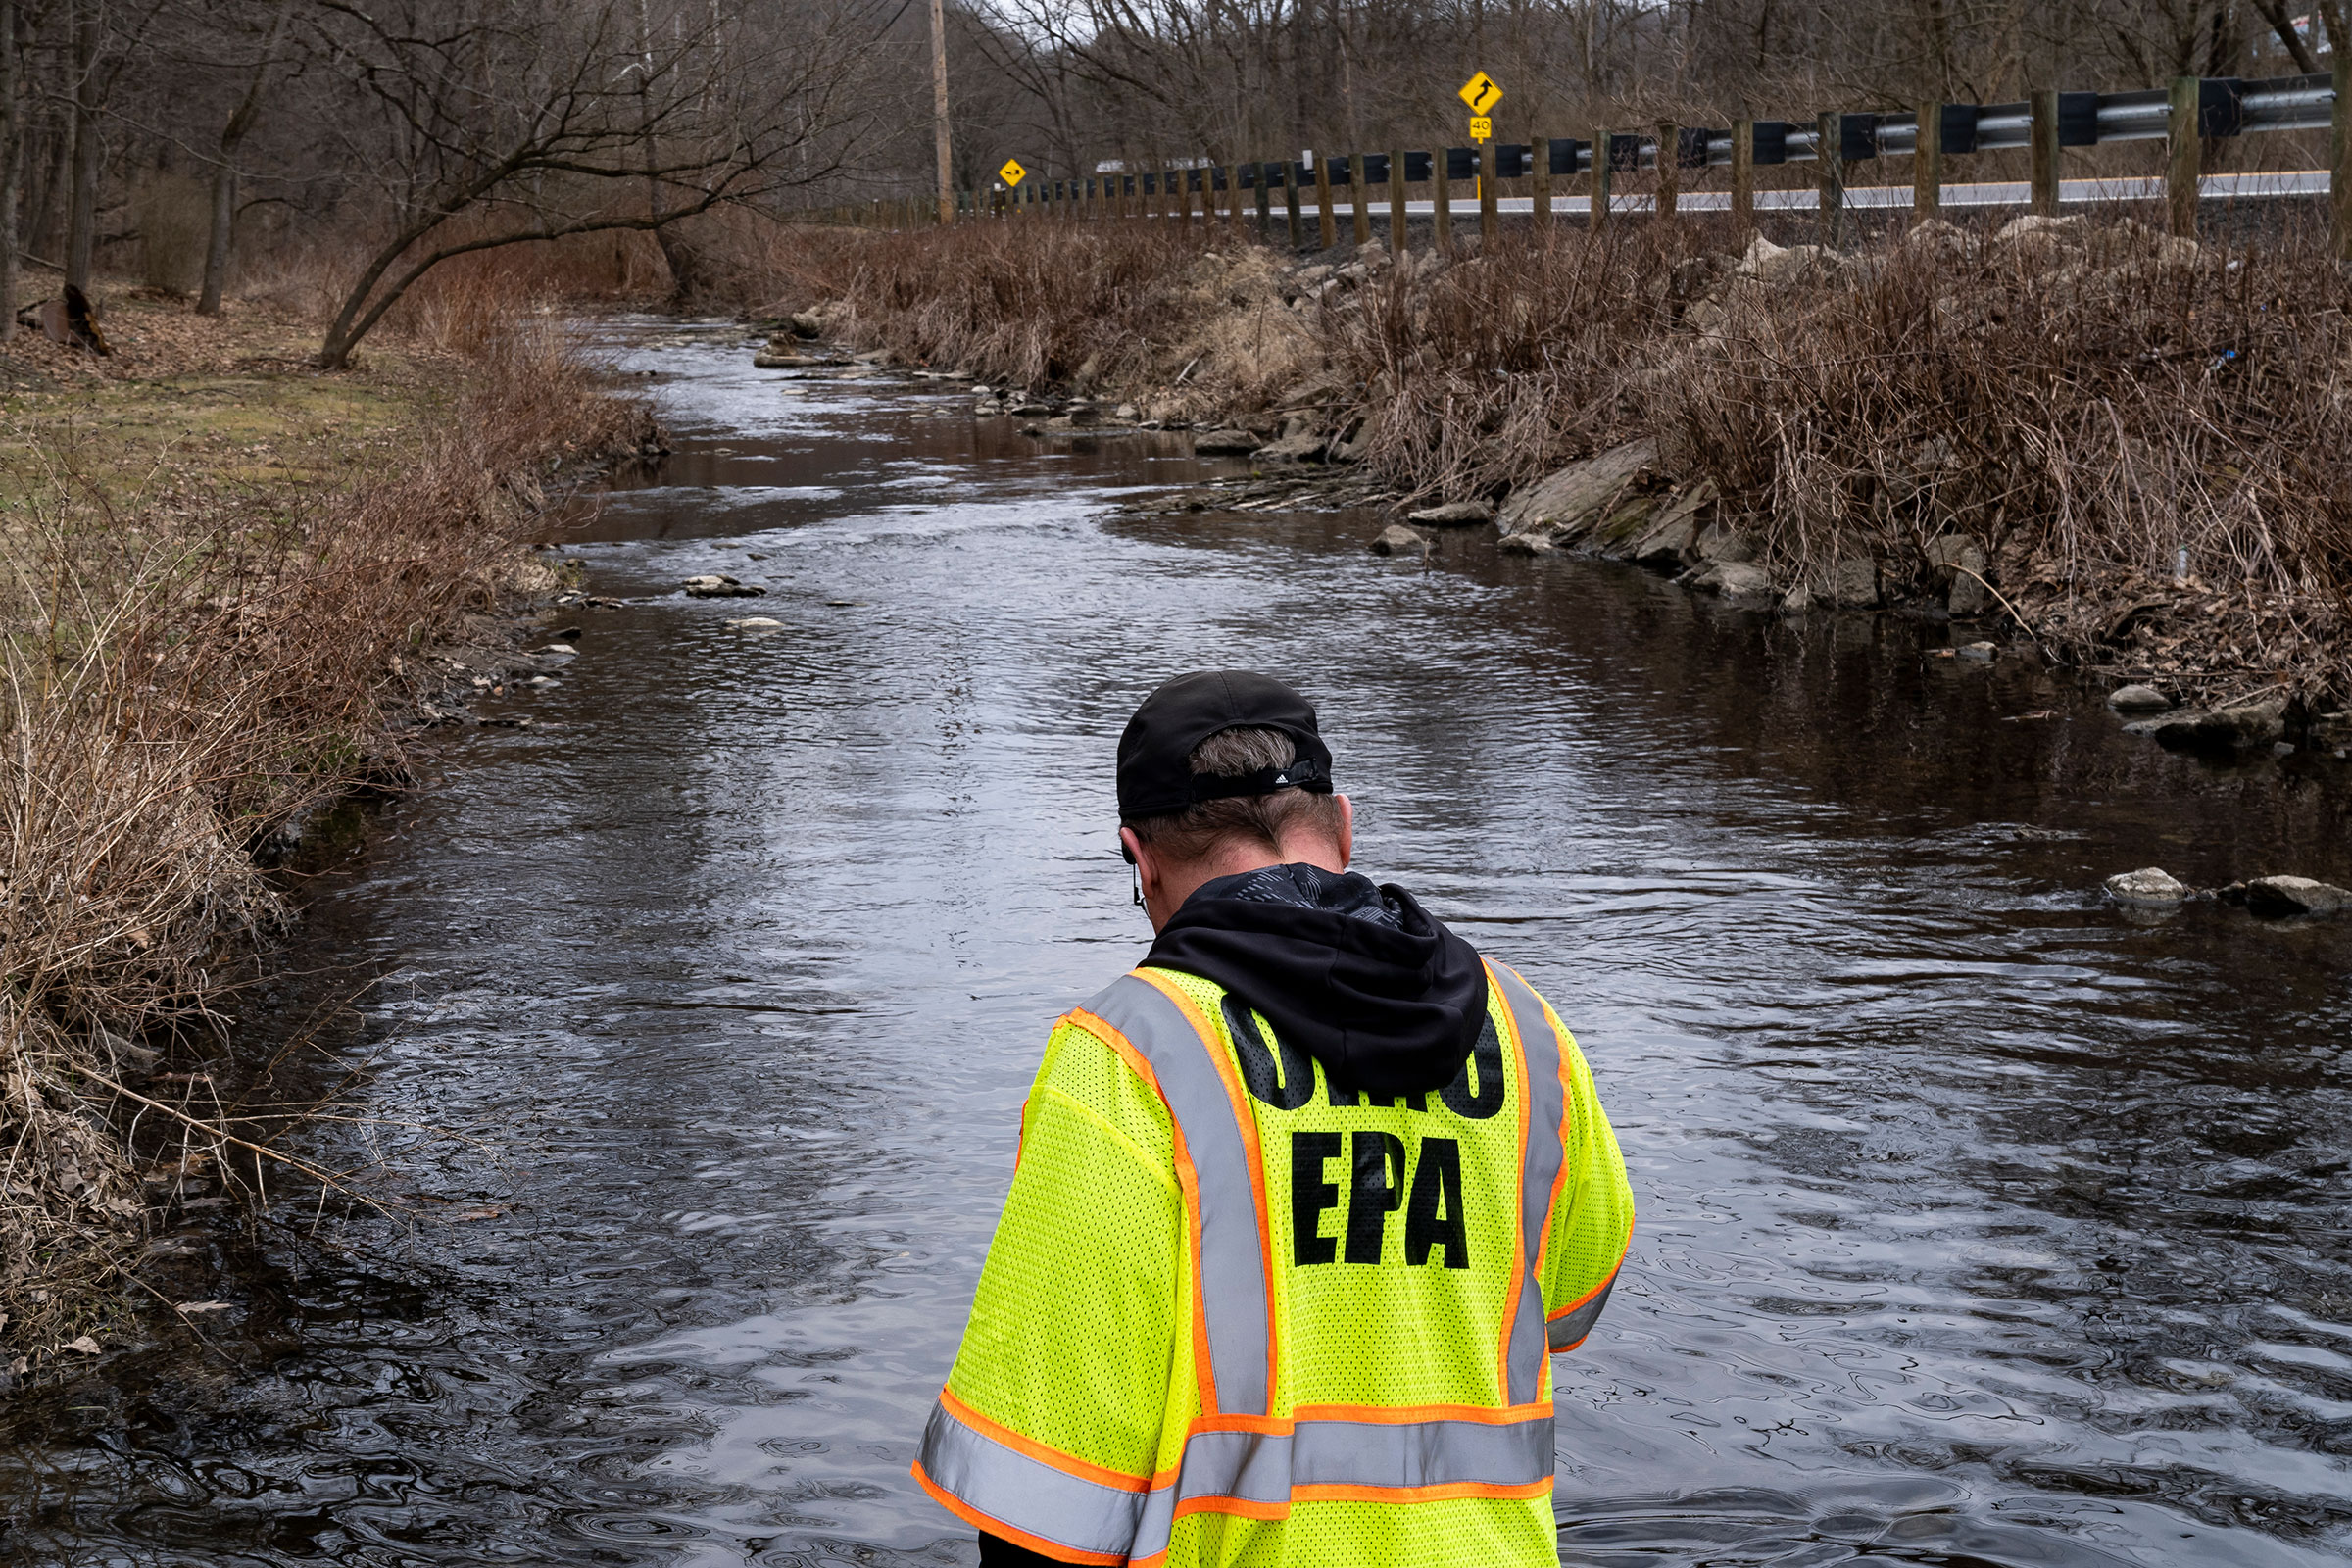 Ron Fodo, Ohio EPA Emergency Response, looks for signs of fish and also agitates the water in Leslie Run creek to check for chemicals that have settled at the bottom following a train derailment that is causing environmental concerns in East Palestine, on Feb. 20, 2023. (Michael Swensen—Getty Images)